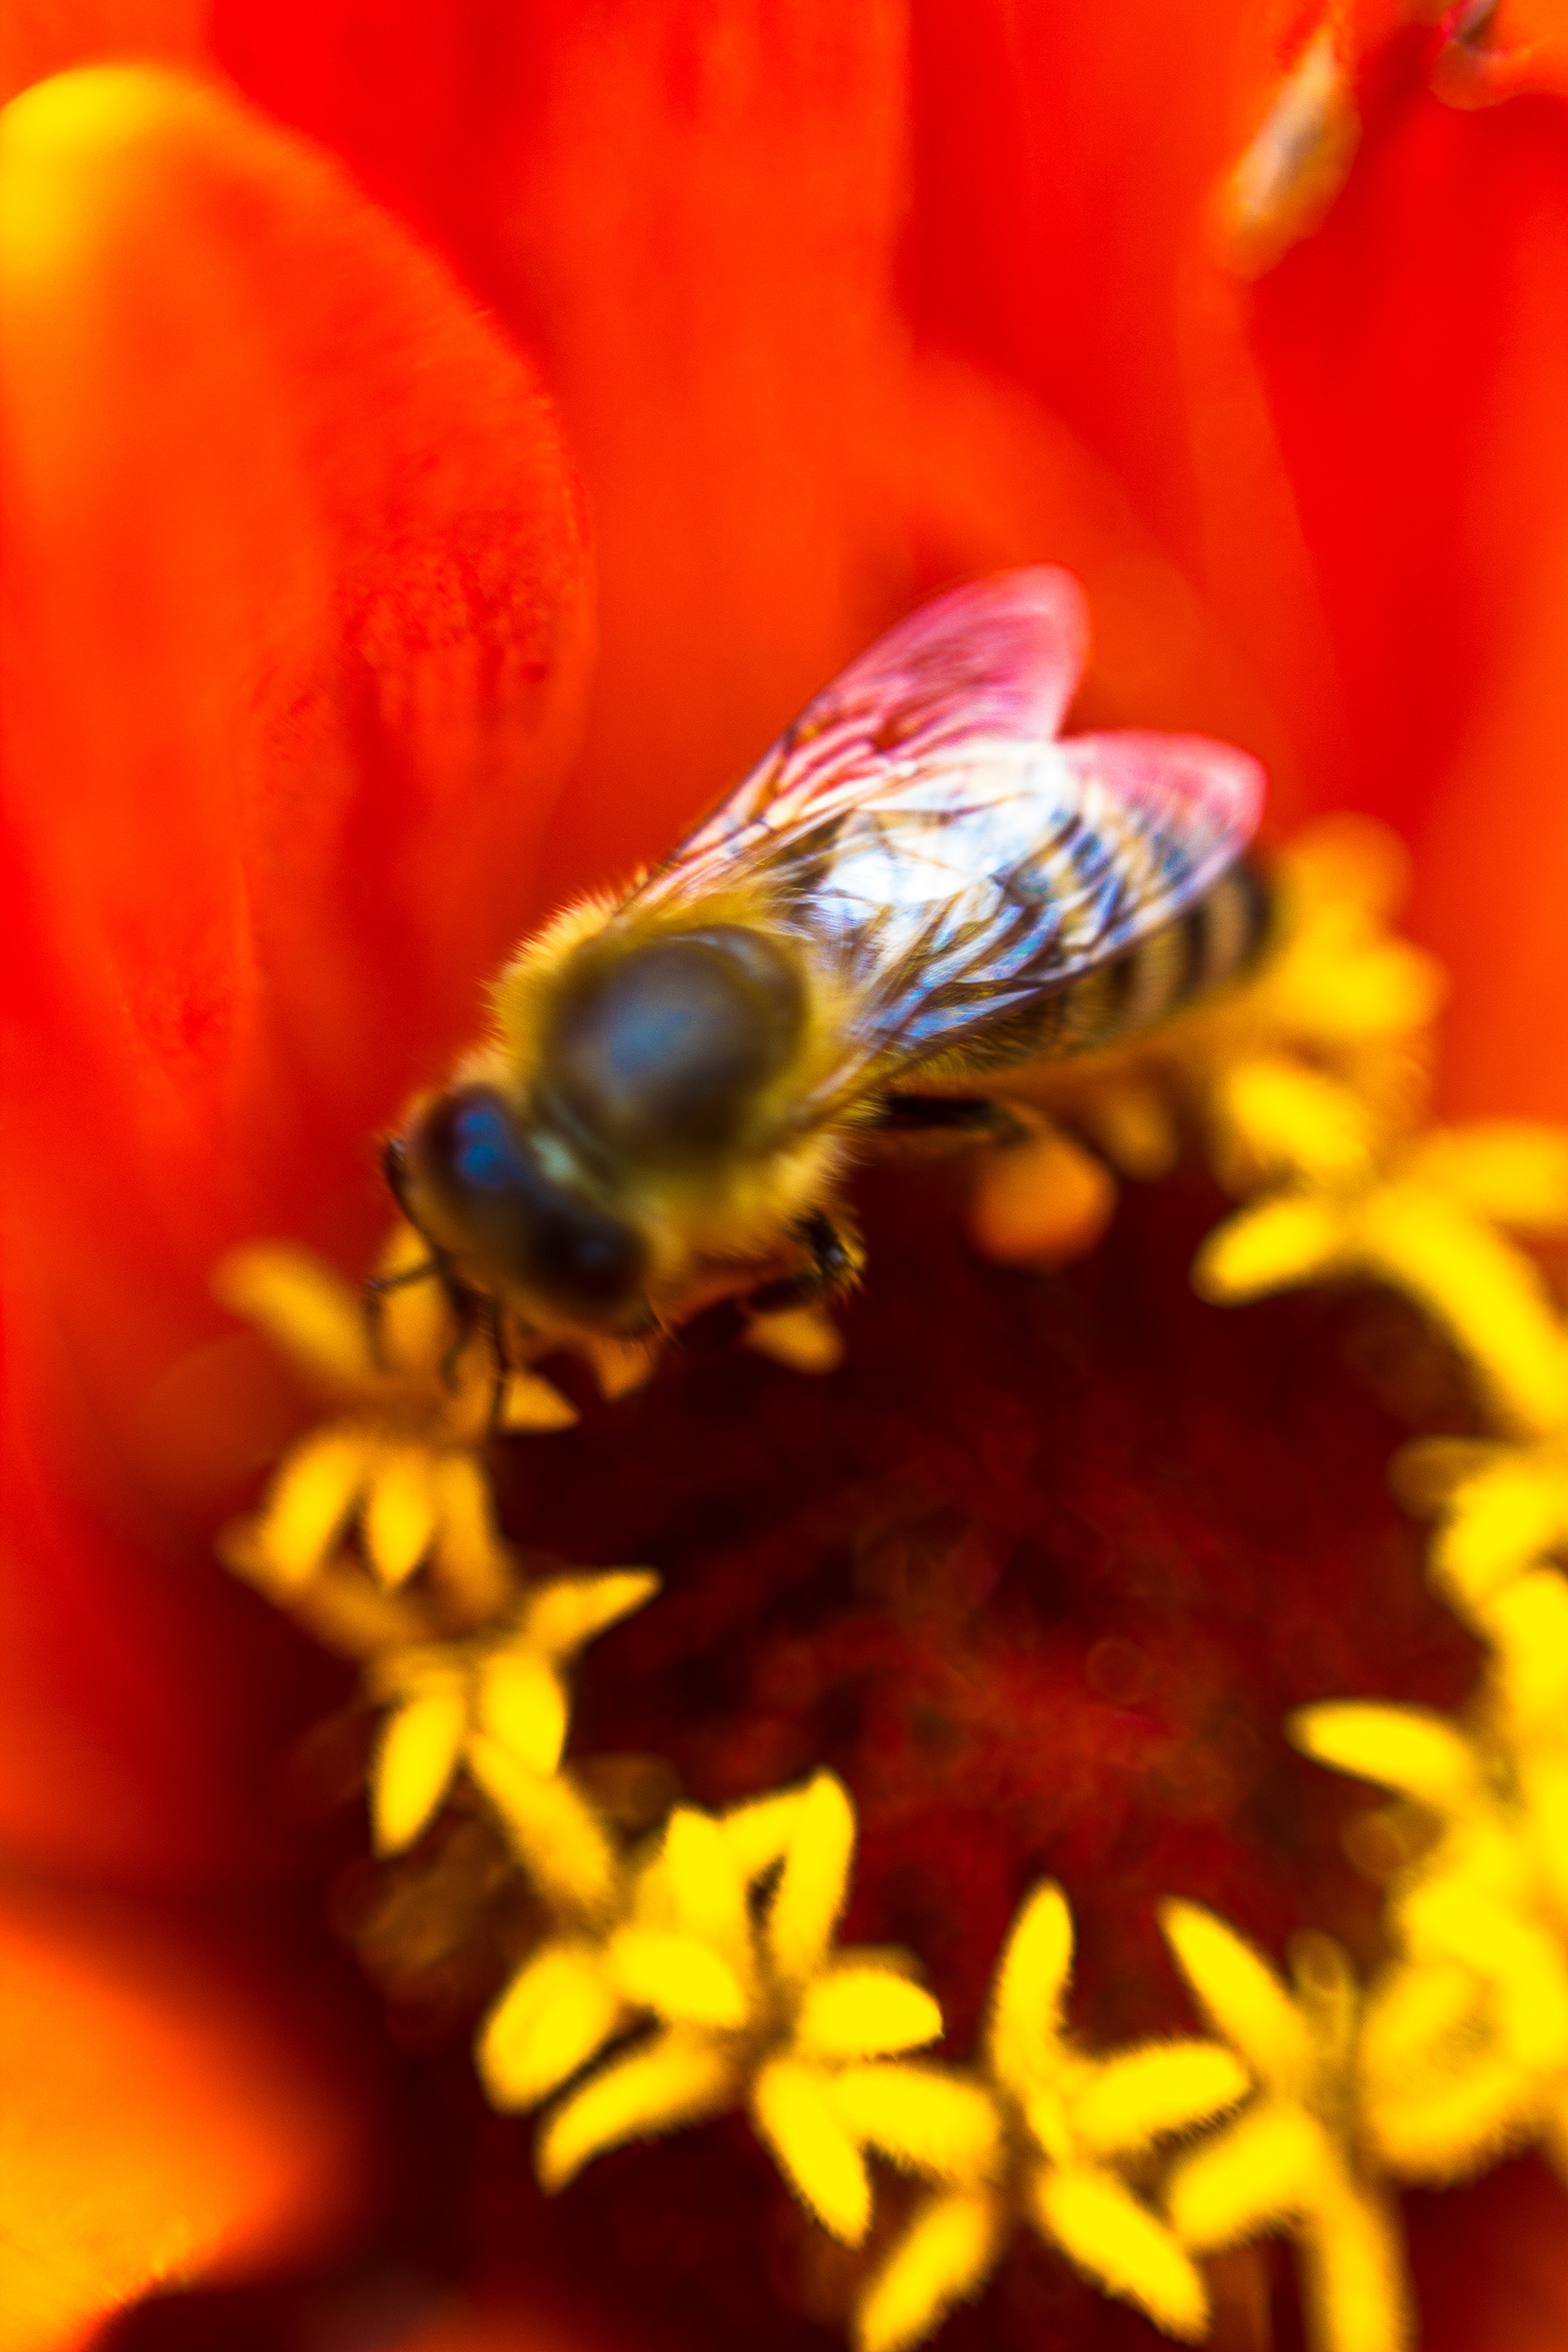 Bee on a flower, Bee, Flower, Fly, Insect, HQ Photo